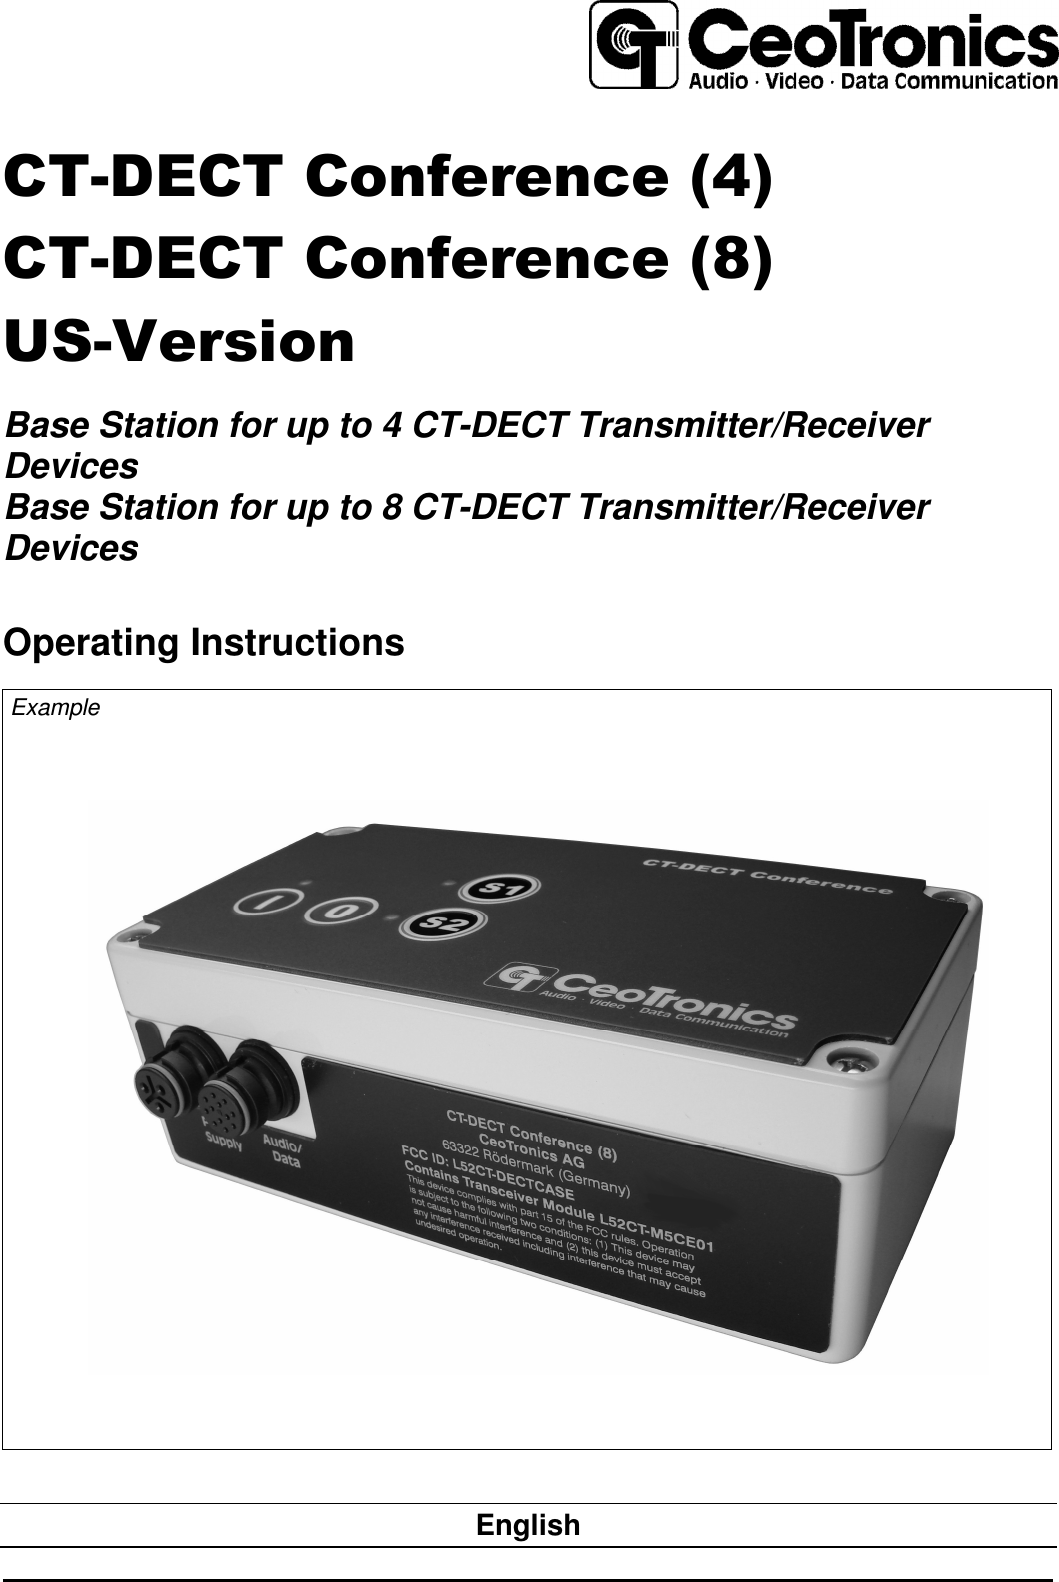       CT-DECT Conference (4) CT-DECT Conference (8) US-Version  Base Station for up to 4 CT-DECT Transmitter/Receiver Devices Base Station for up to 8 CT-DECT Transmitter/Receiver Devices   Operating Instructions Example                           English 